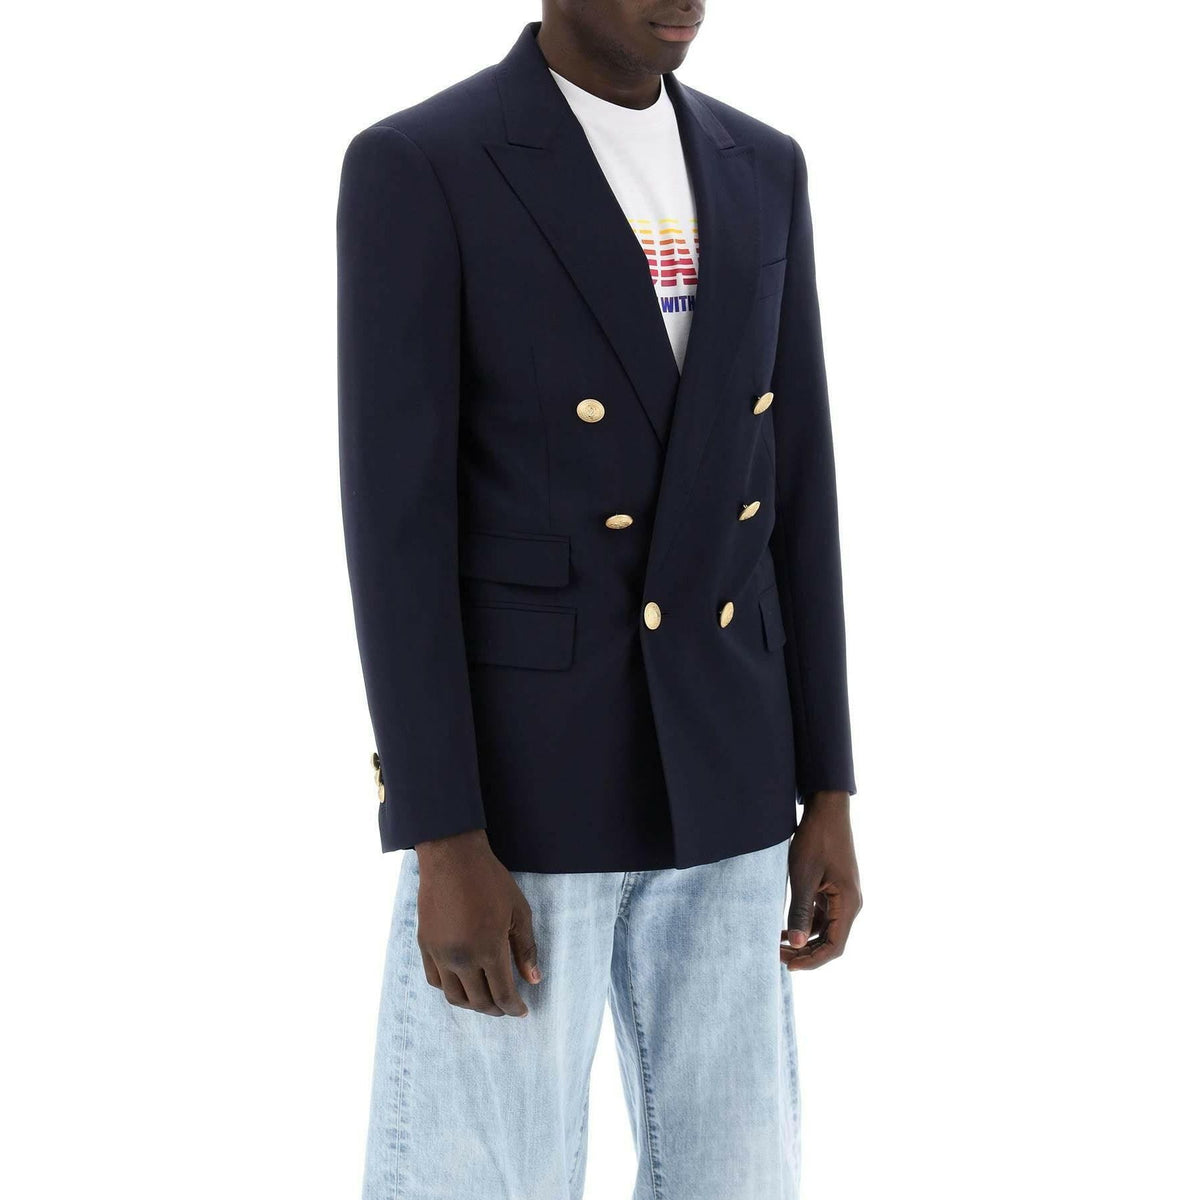 DSQUARED2 - Navy Blue Wool Palm Beach Double-Breasted Jacket With Gold Buttons - JOHN JULIA